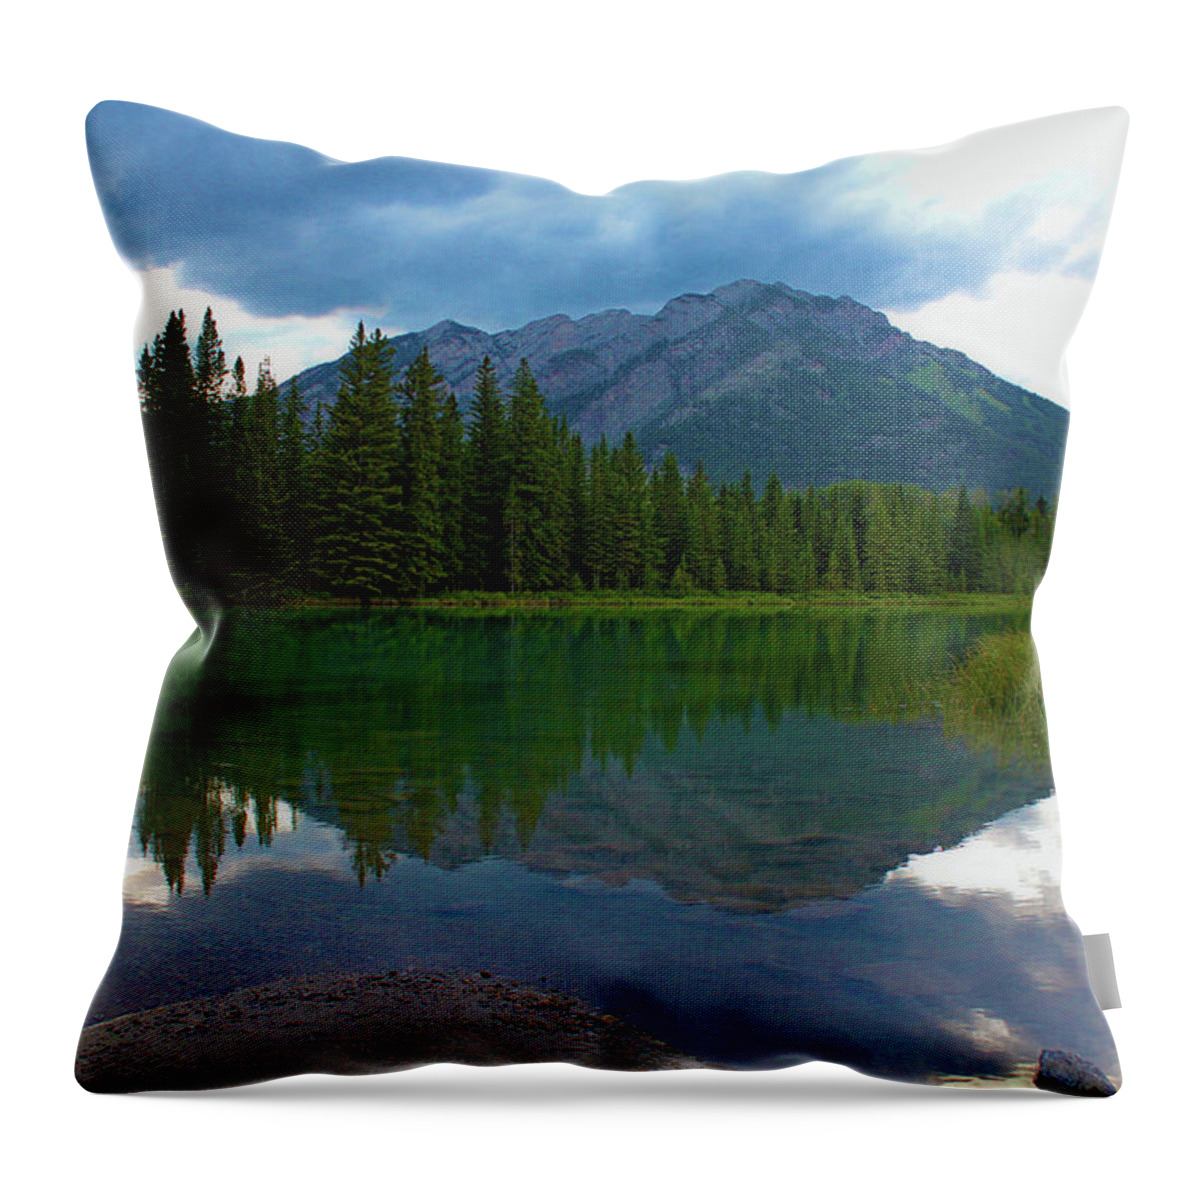 Reflection Lake Throw Pillow featuring the photograph Reflection Lake by Linda Sannuti